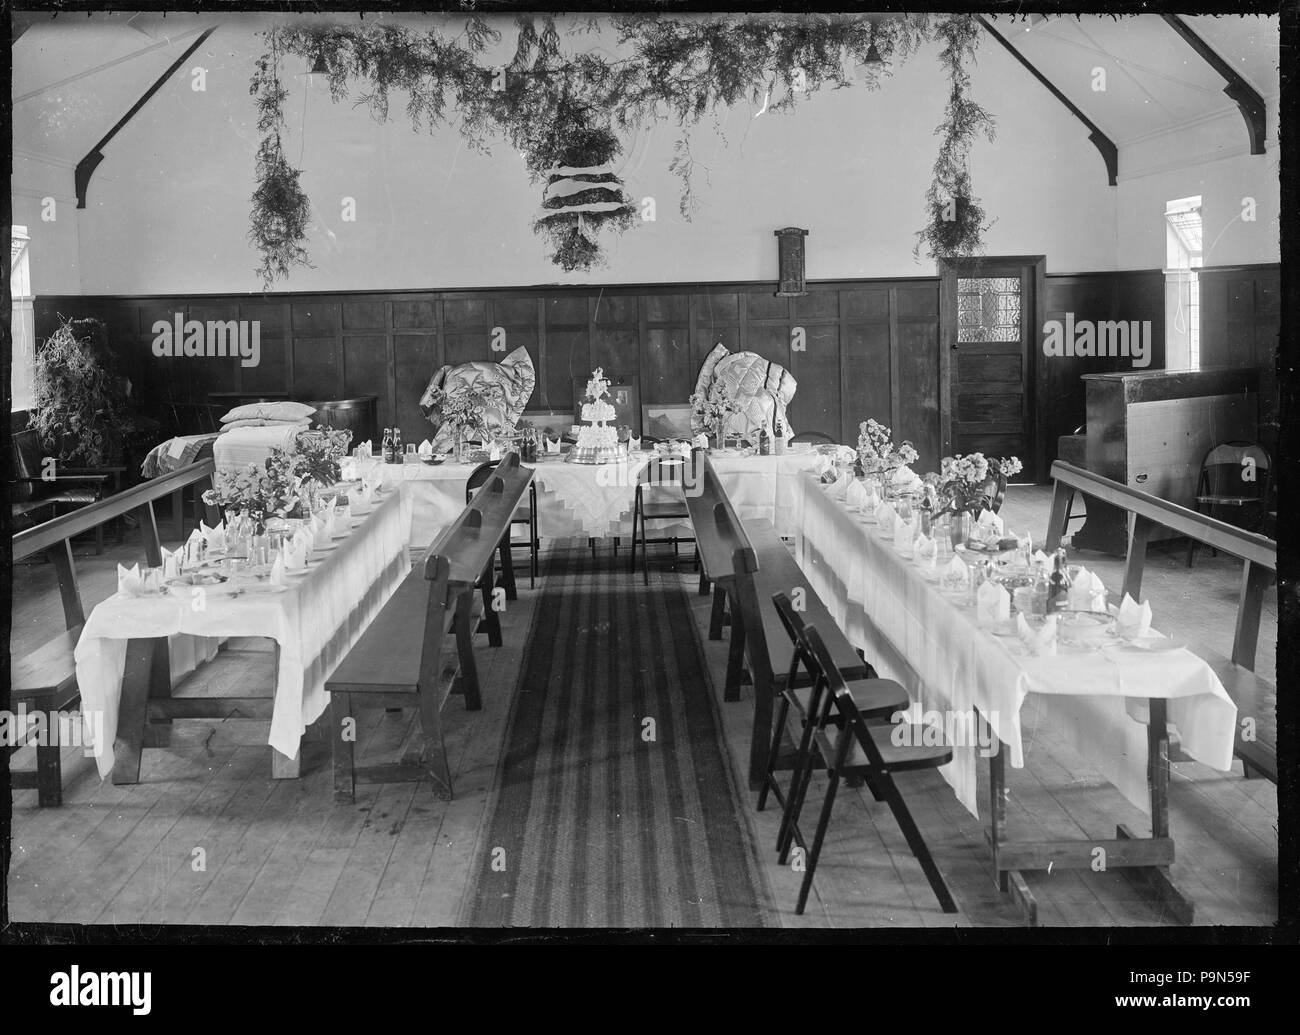 324 View of the wedding breakfast table arrangements for the marriage of Phyllis Godber and Cecil Hartwig, at Silverstream, 1932 ATLIB 313151 Stock Photo